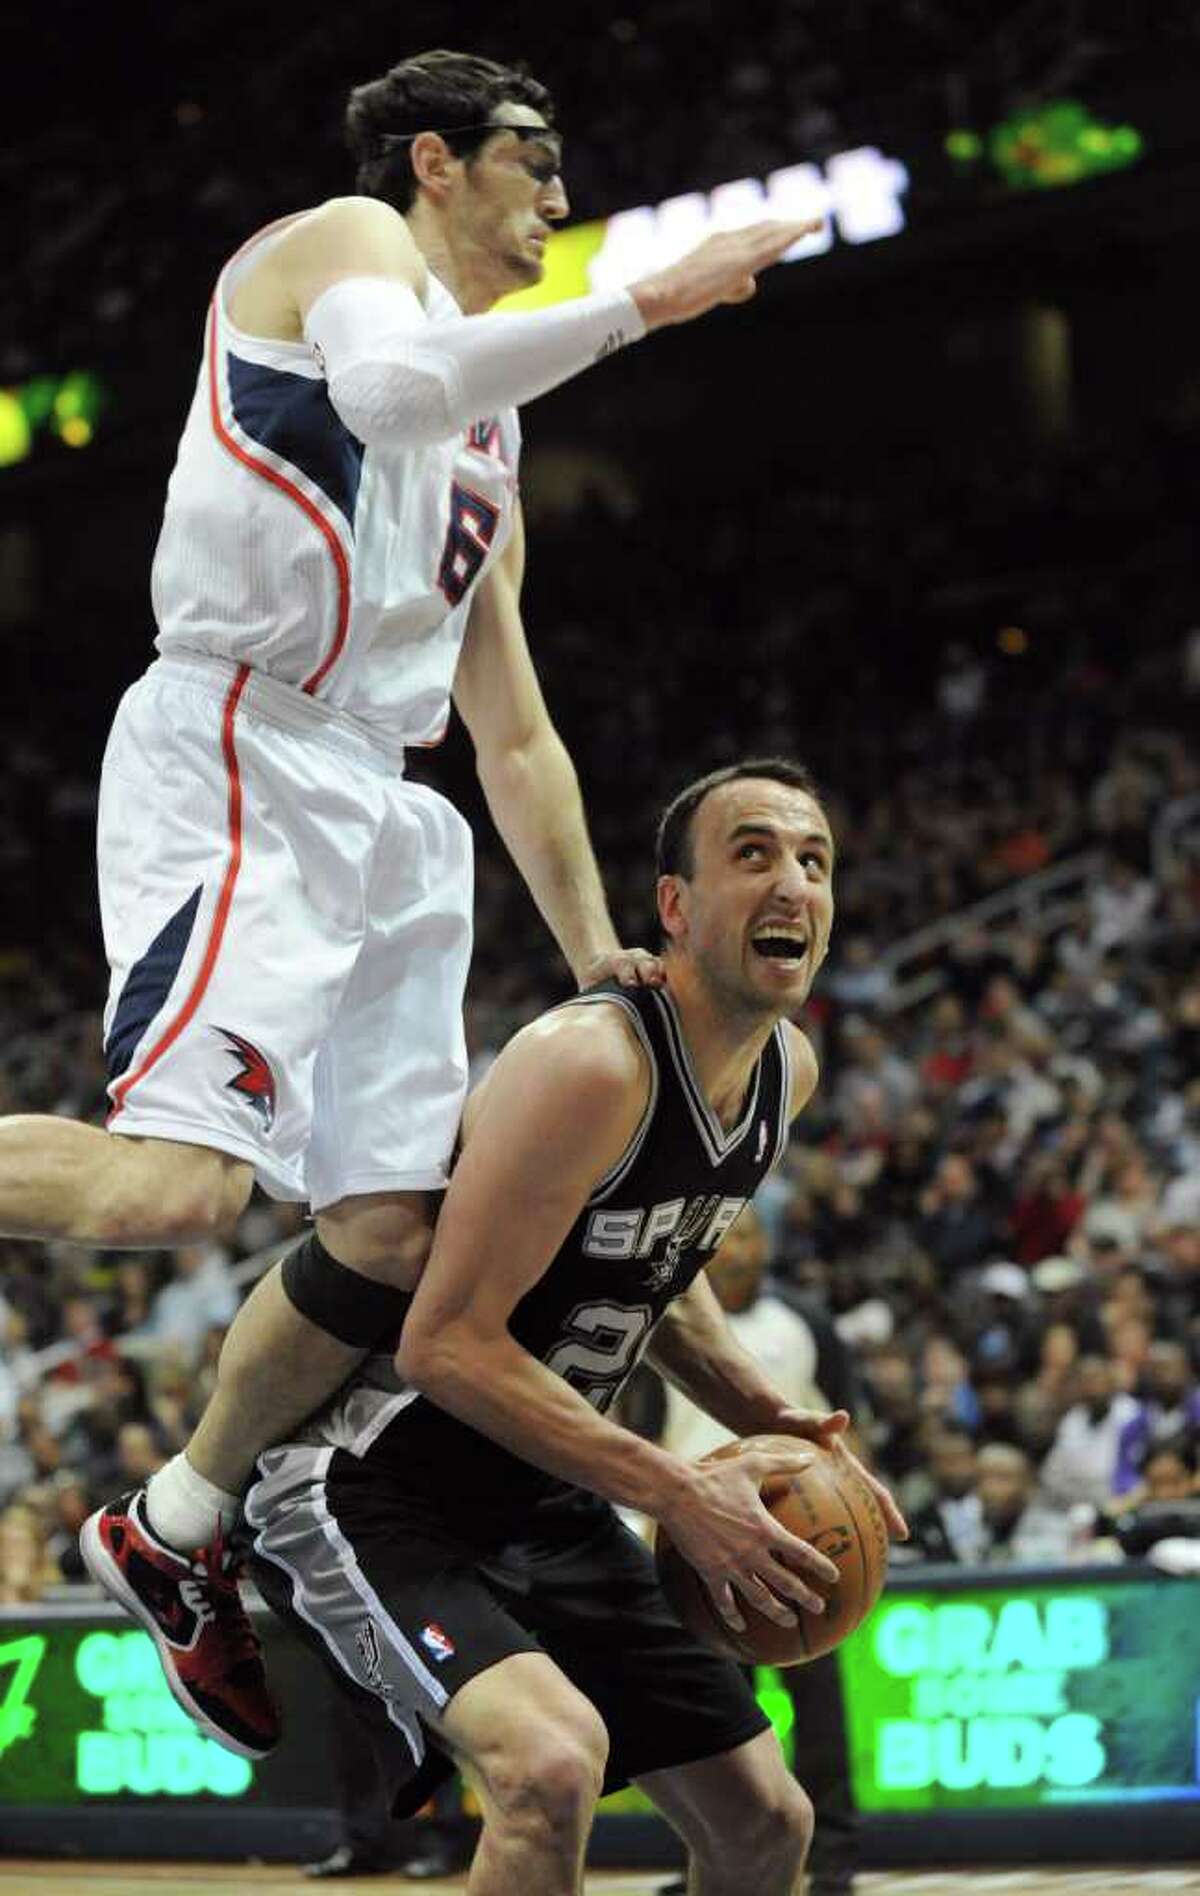 Atlanta Hawks guard Kirk Hinrich, left, commits a flagrant foul on San Antonio Spurs guard Manu Ginobili, of Argentina, in the second half during an NBA basketball game Tuesday, April 5, 2011, in Atlanta. The Spurs defeated the Hawks 97-90.